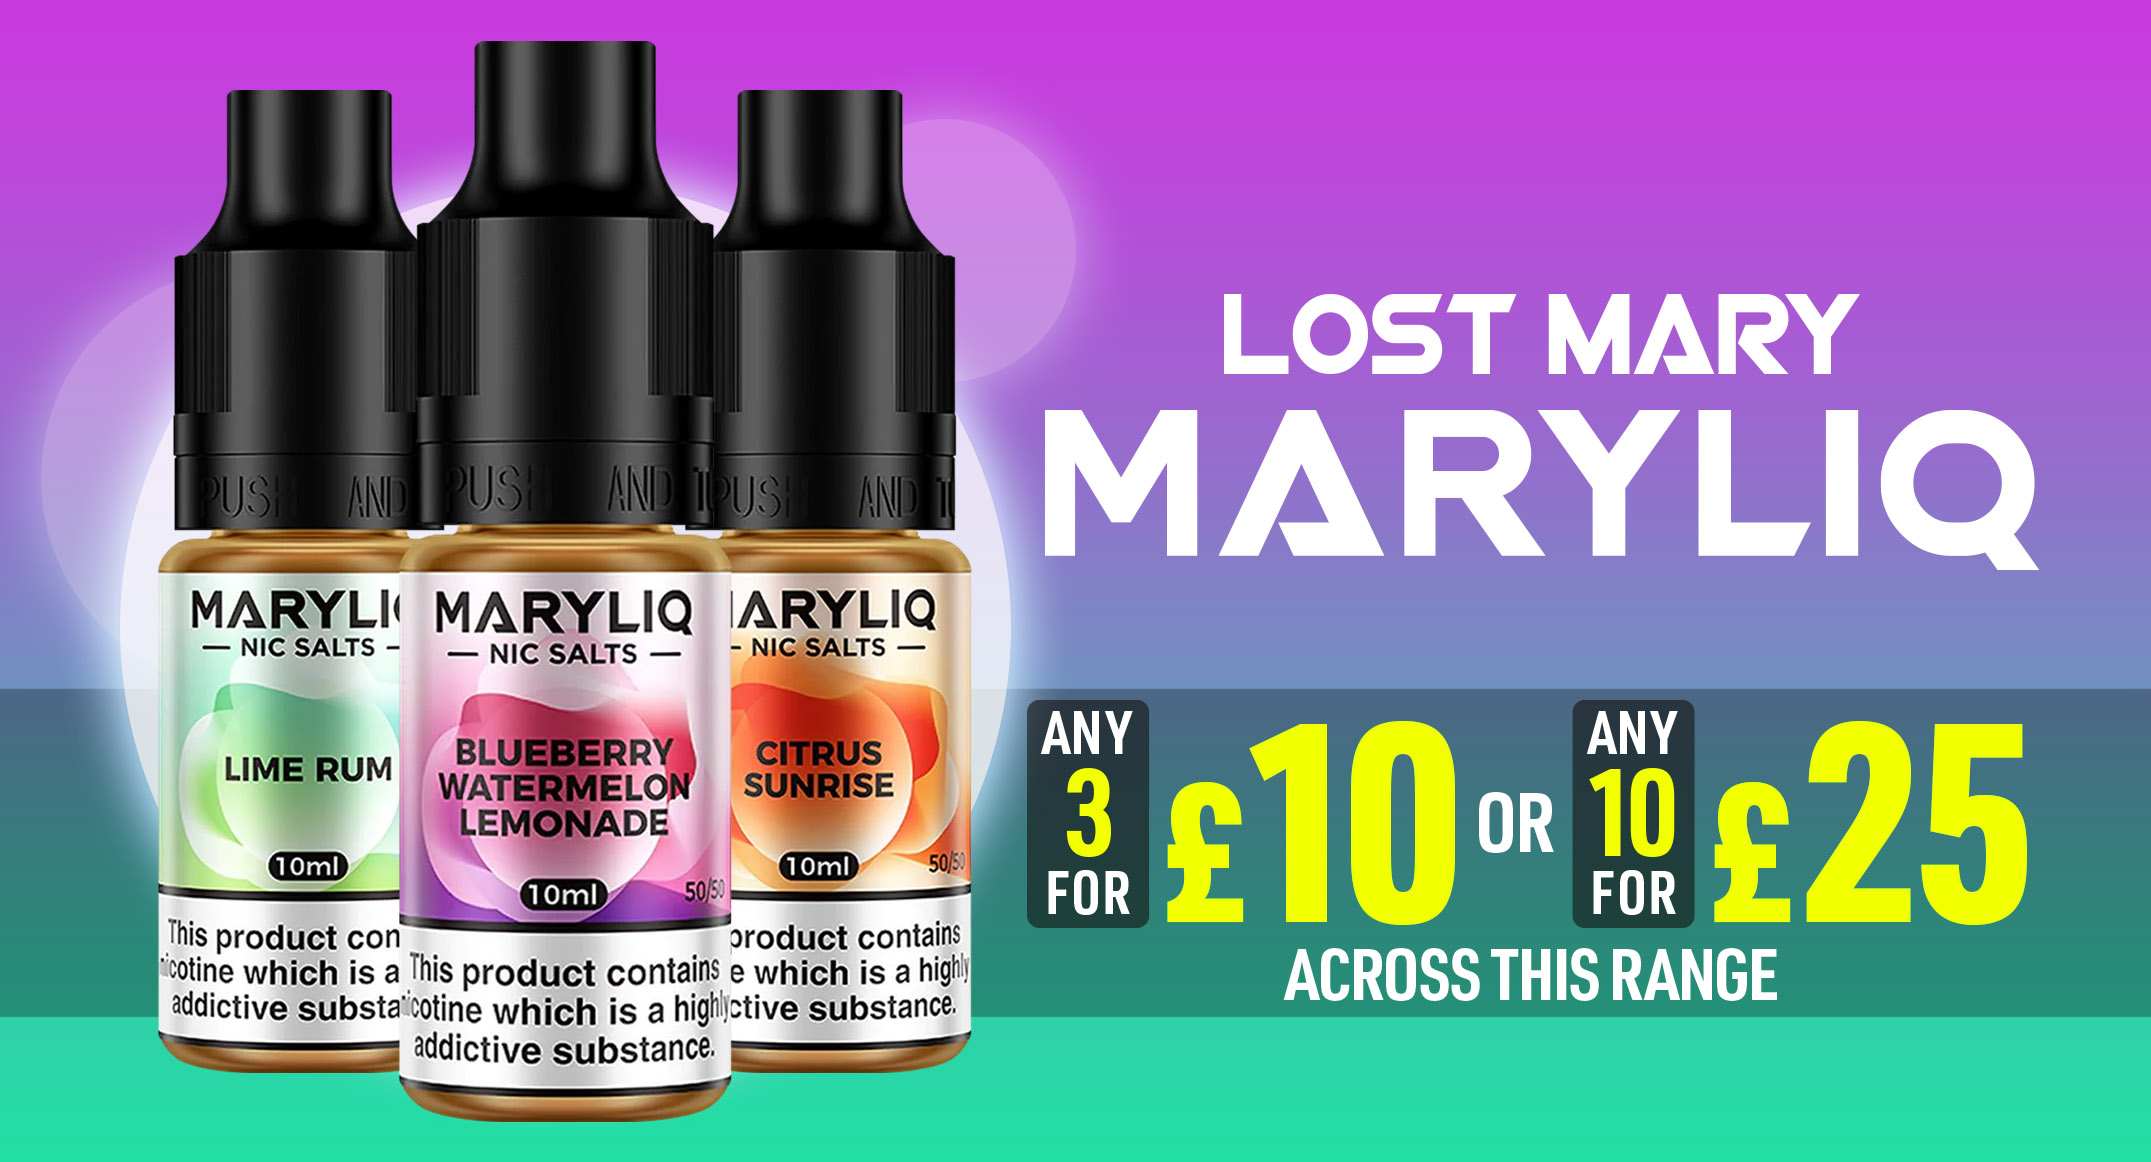 lost mary maryliq home page